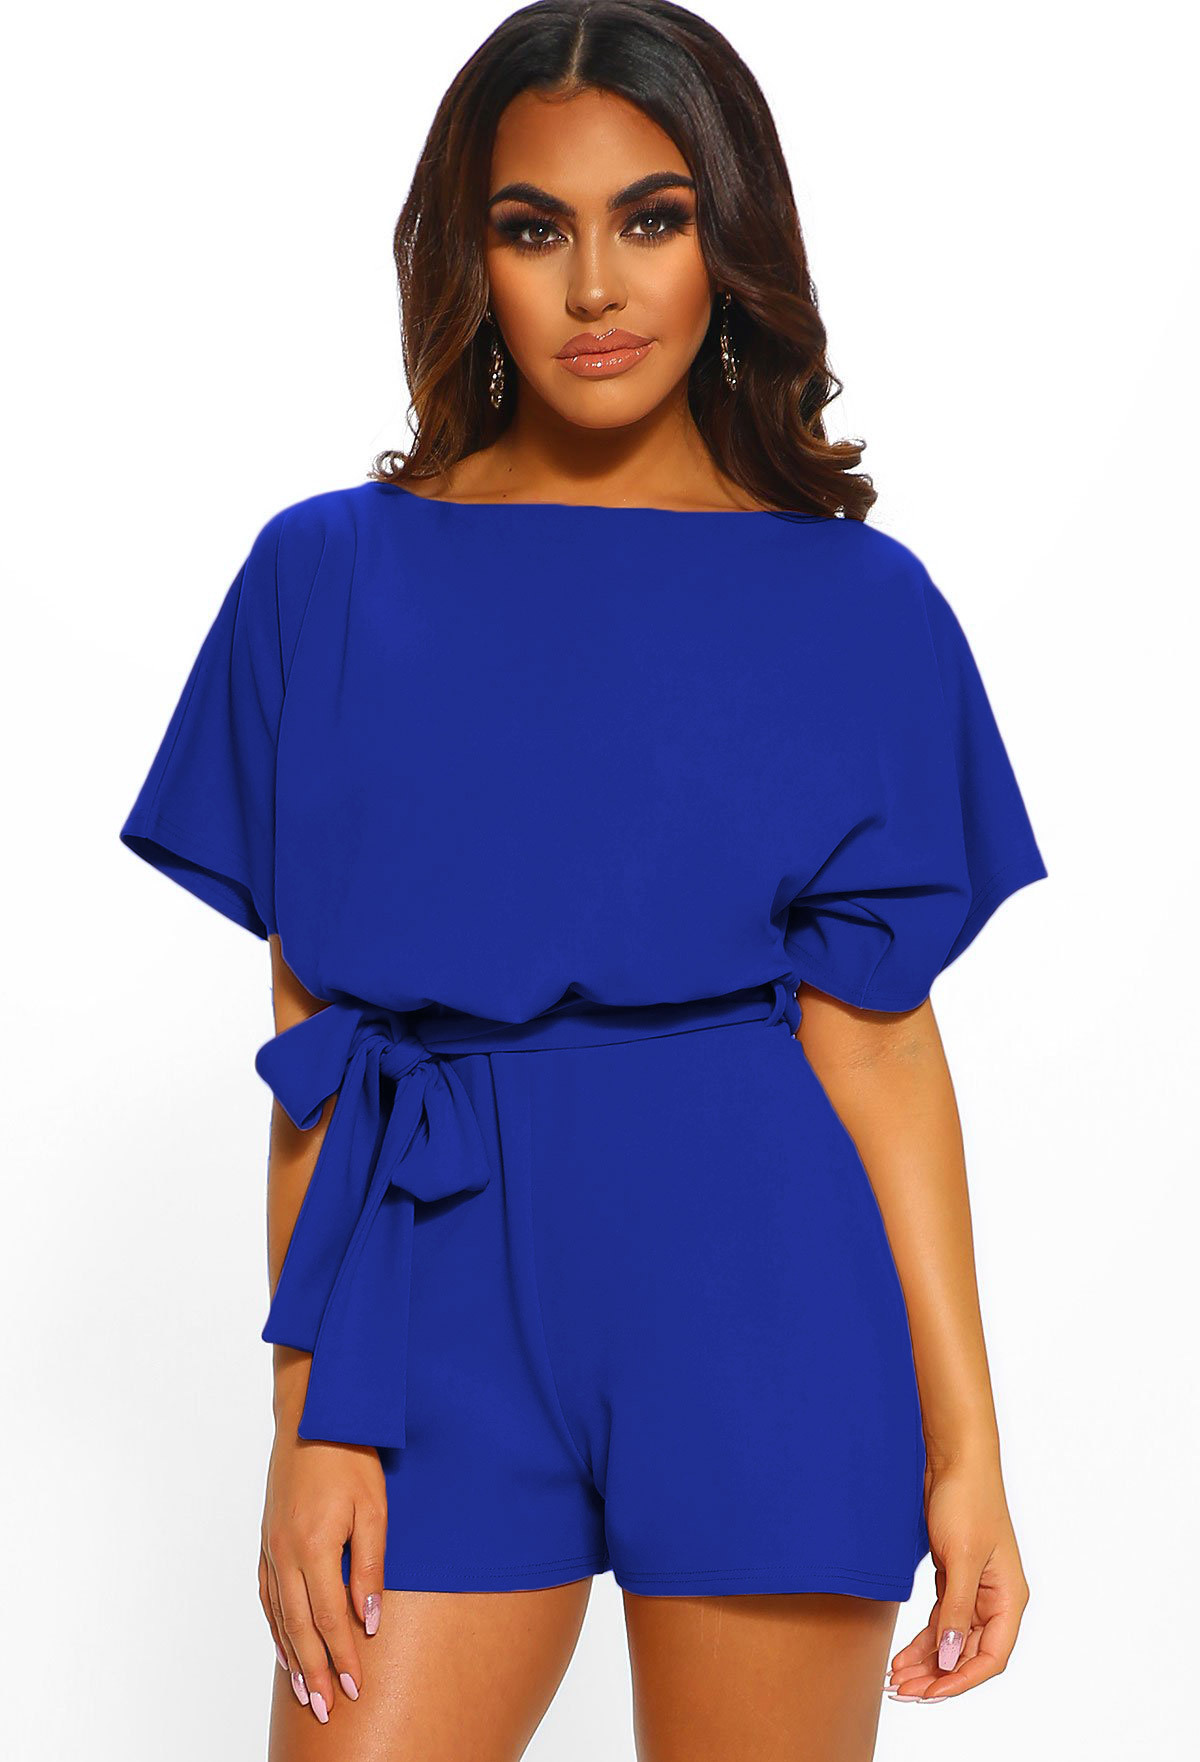 Women Jumpsuit Summer Short Sleeve Belted Casual Shorts Rompers Playsuit royal blue